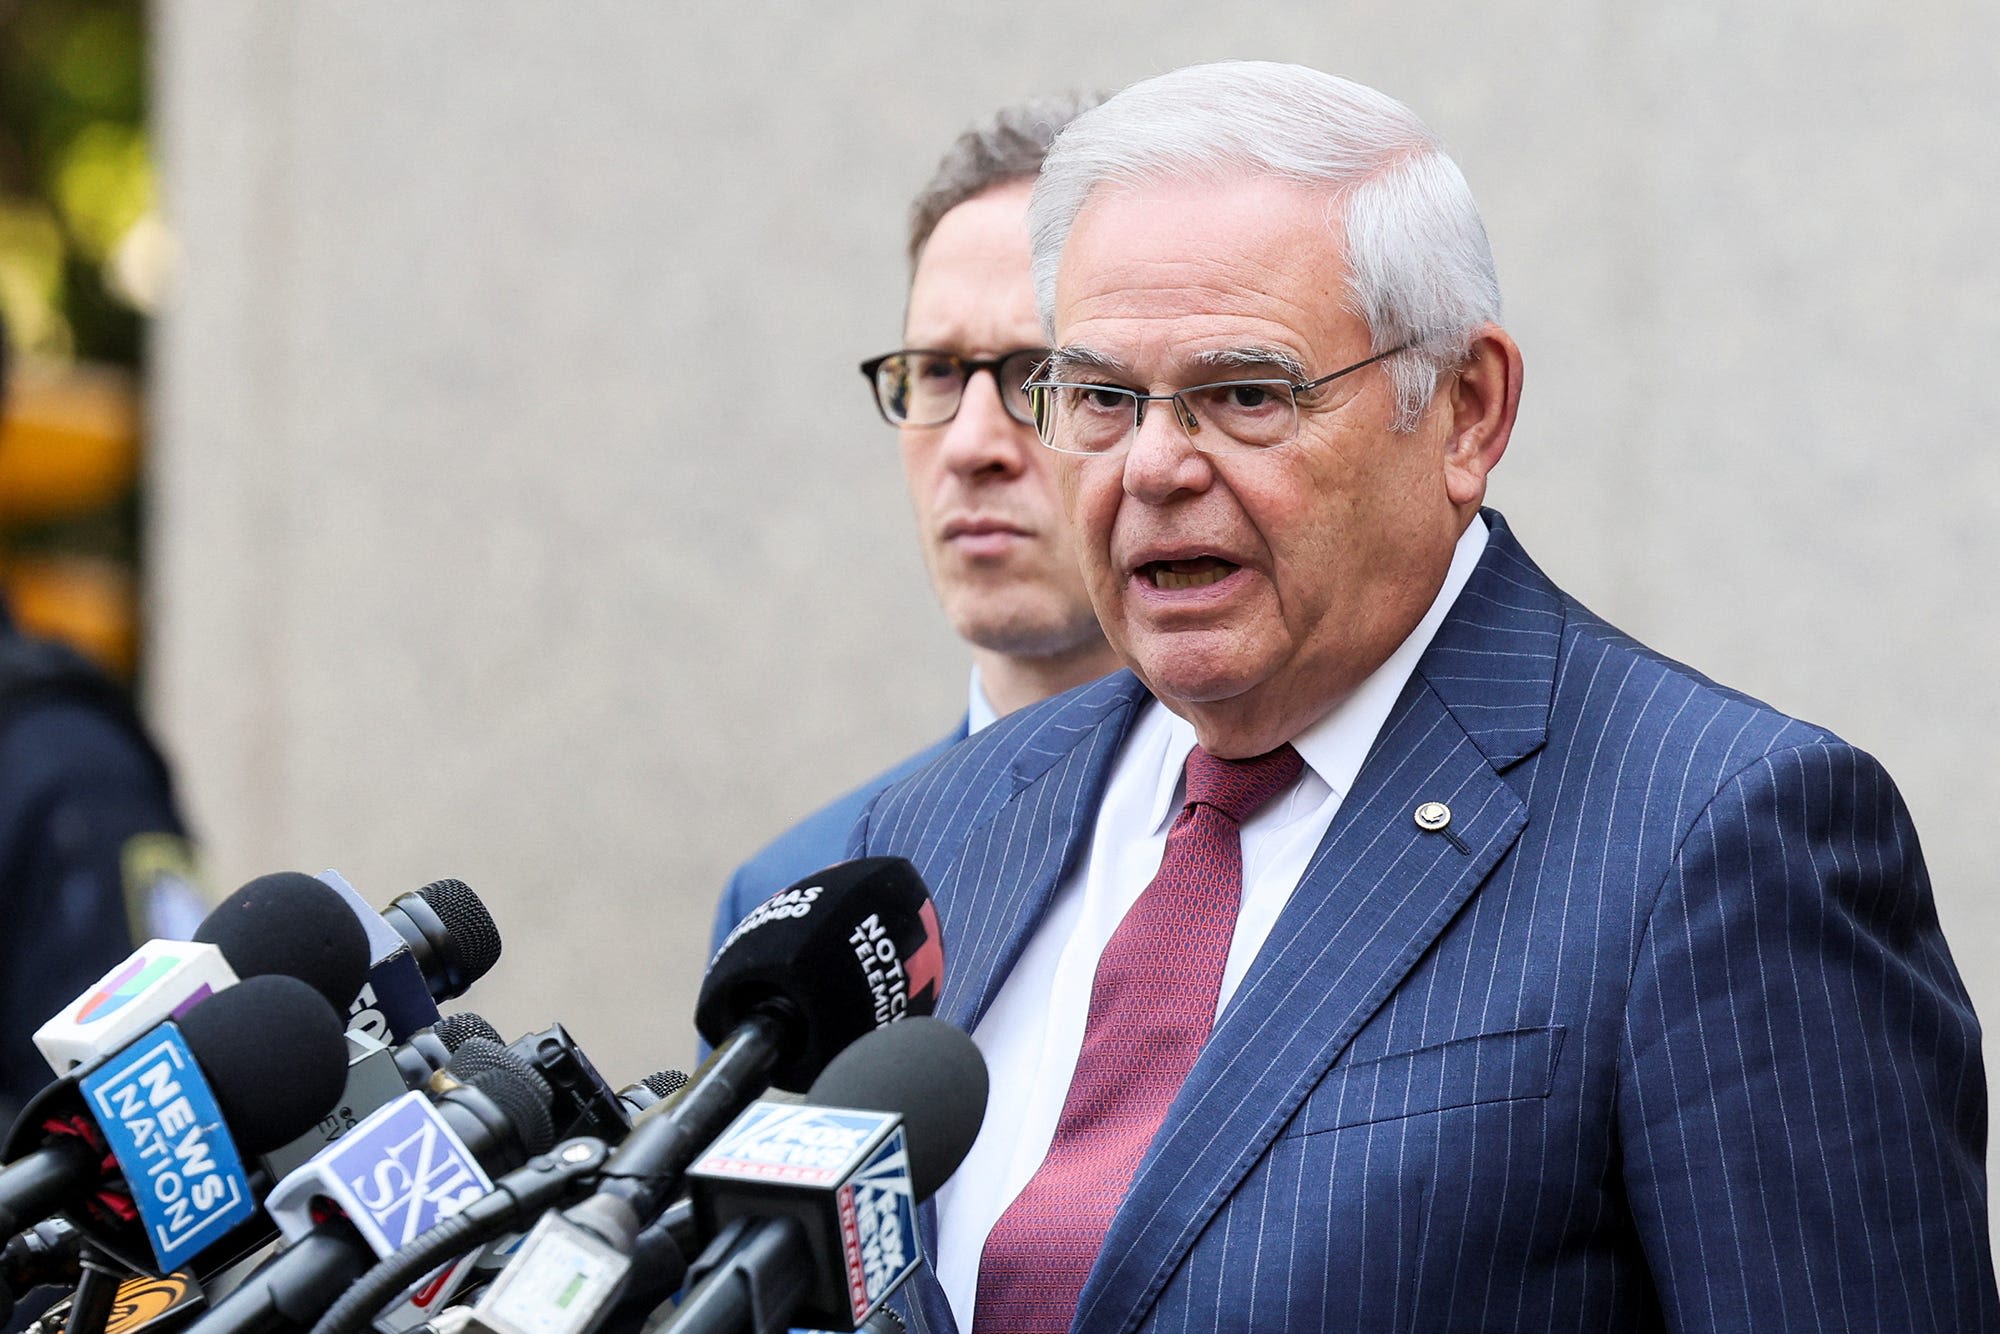 How Bob Menendez conviction could change how politicians are prosecuted - Stile